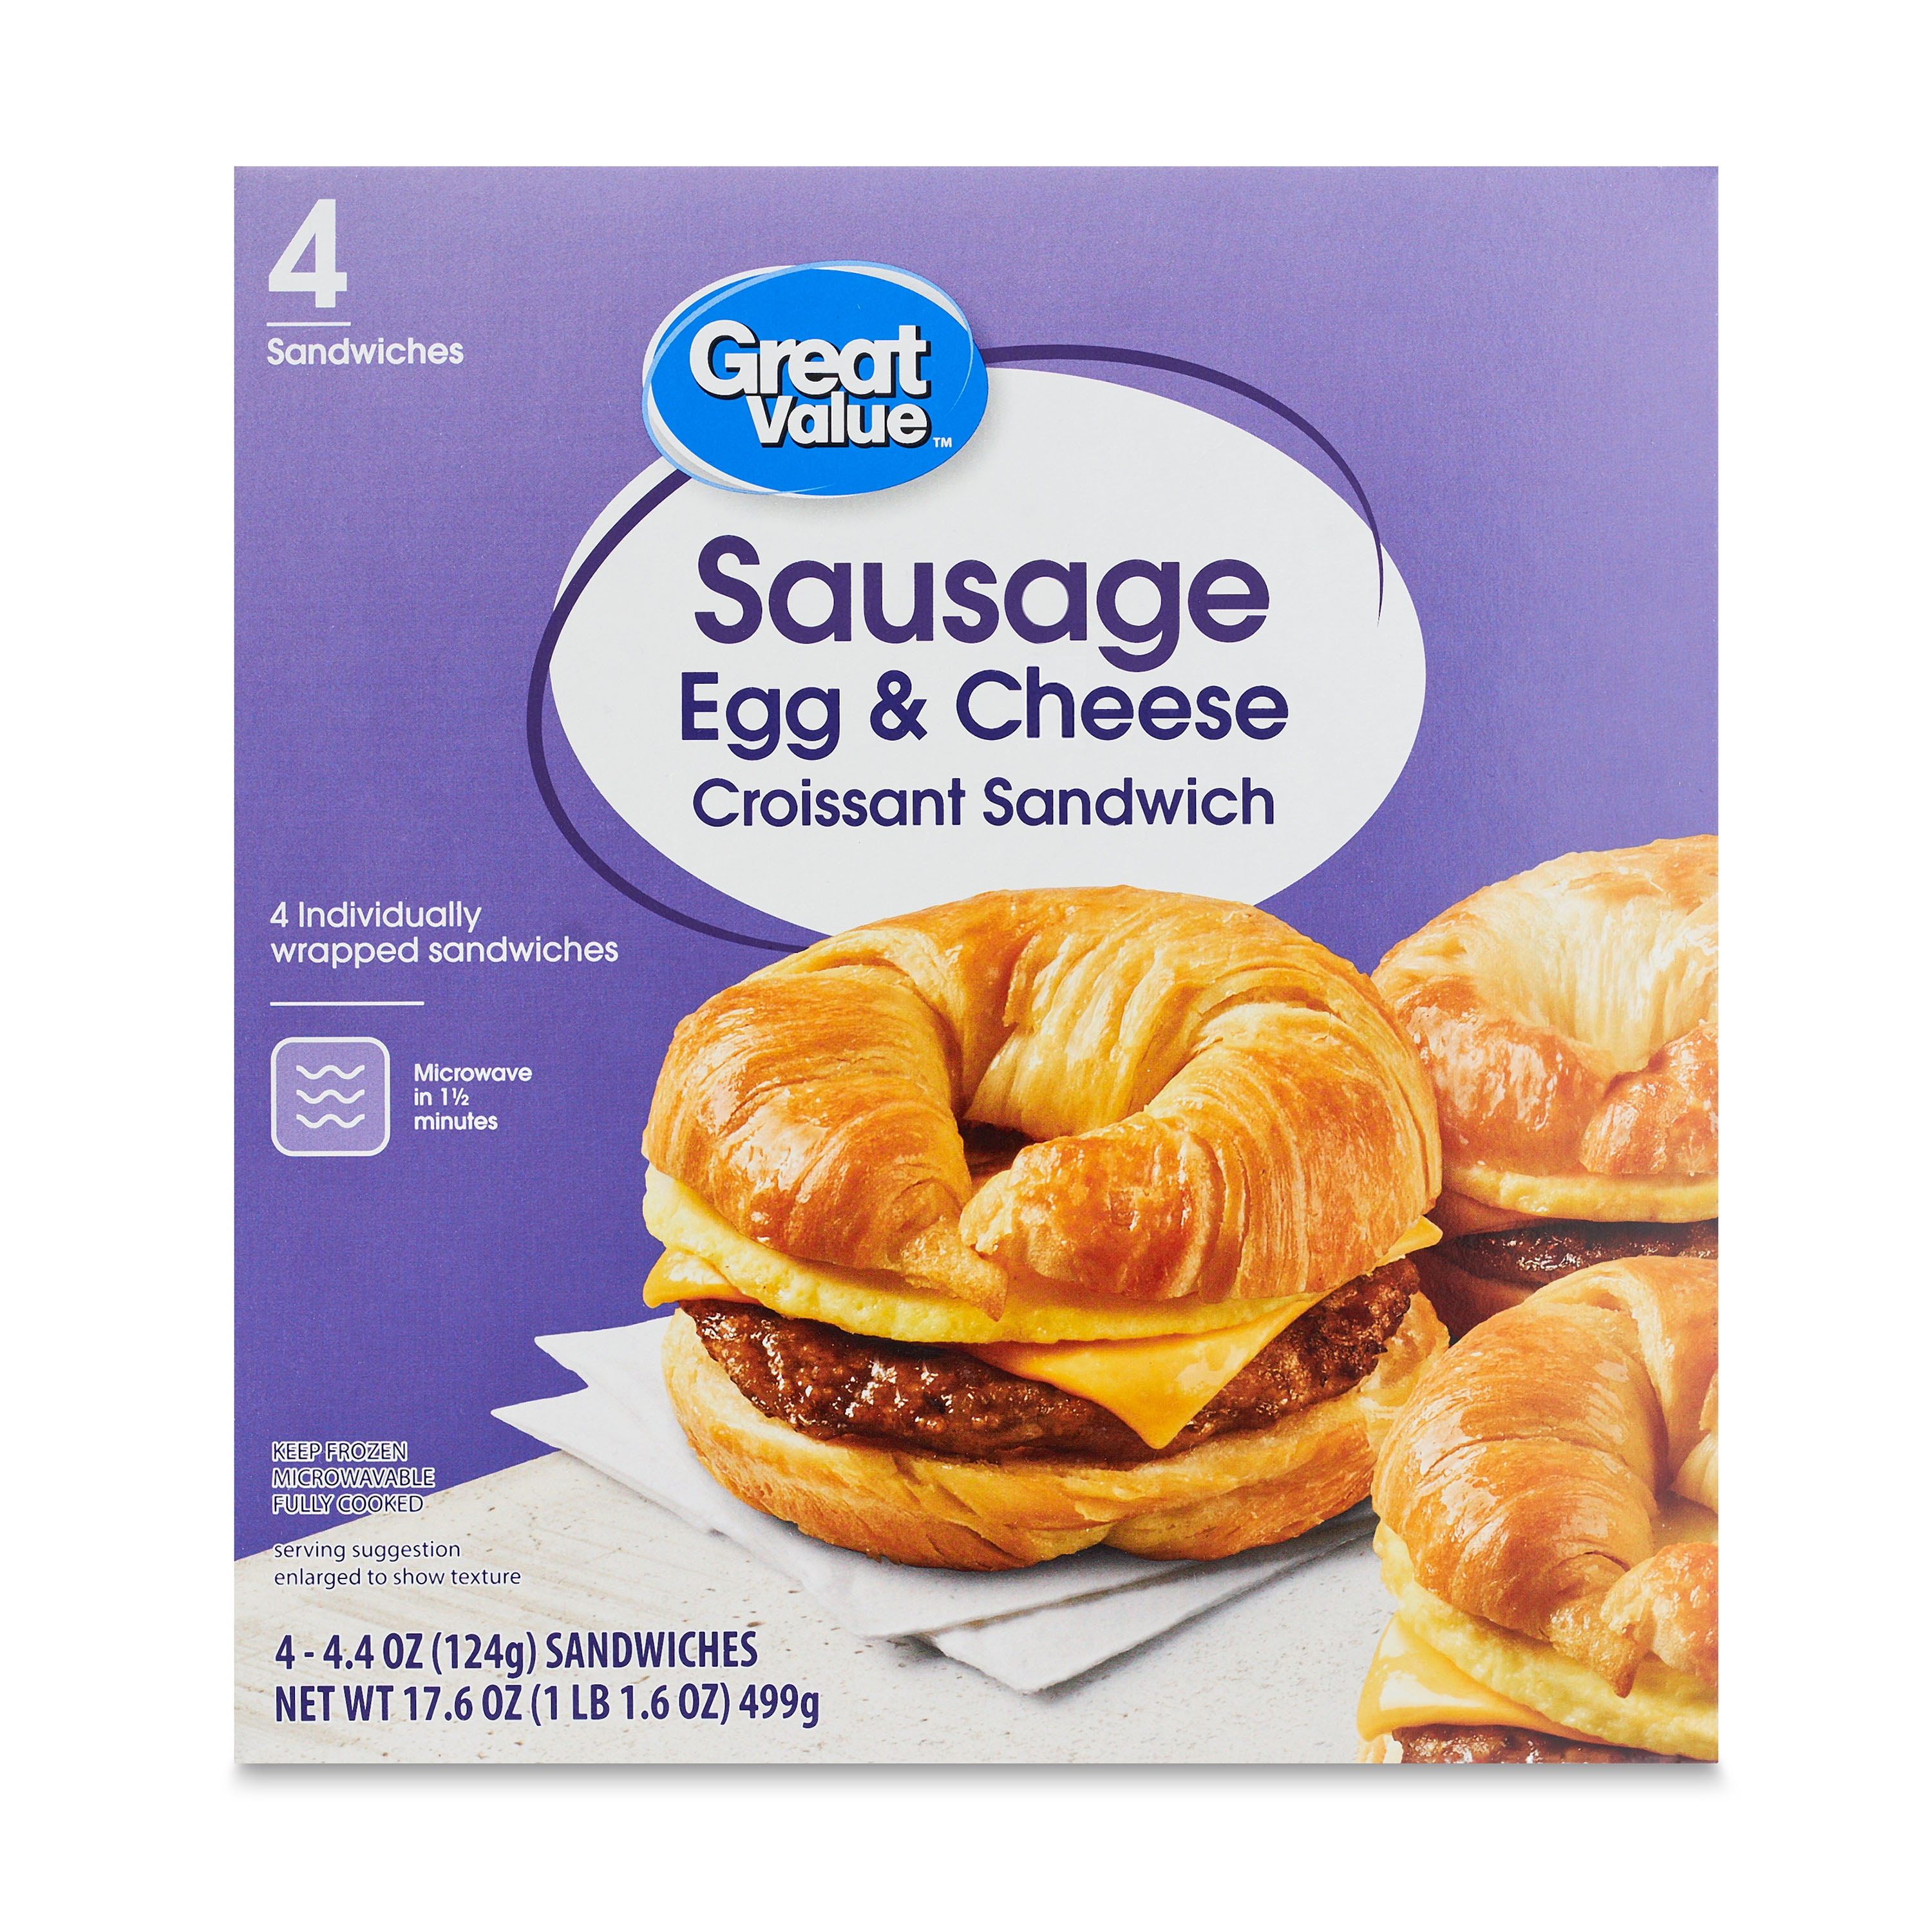 Great Value Croissant Sandwiches Sausage Egg and Cheese, 4 Count (Frozen)